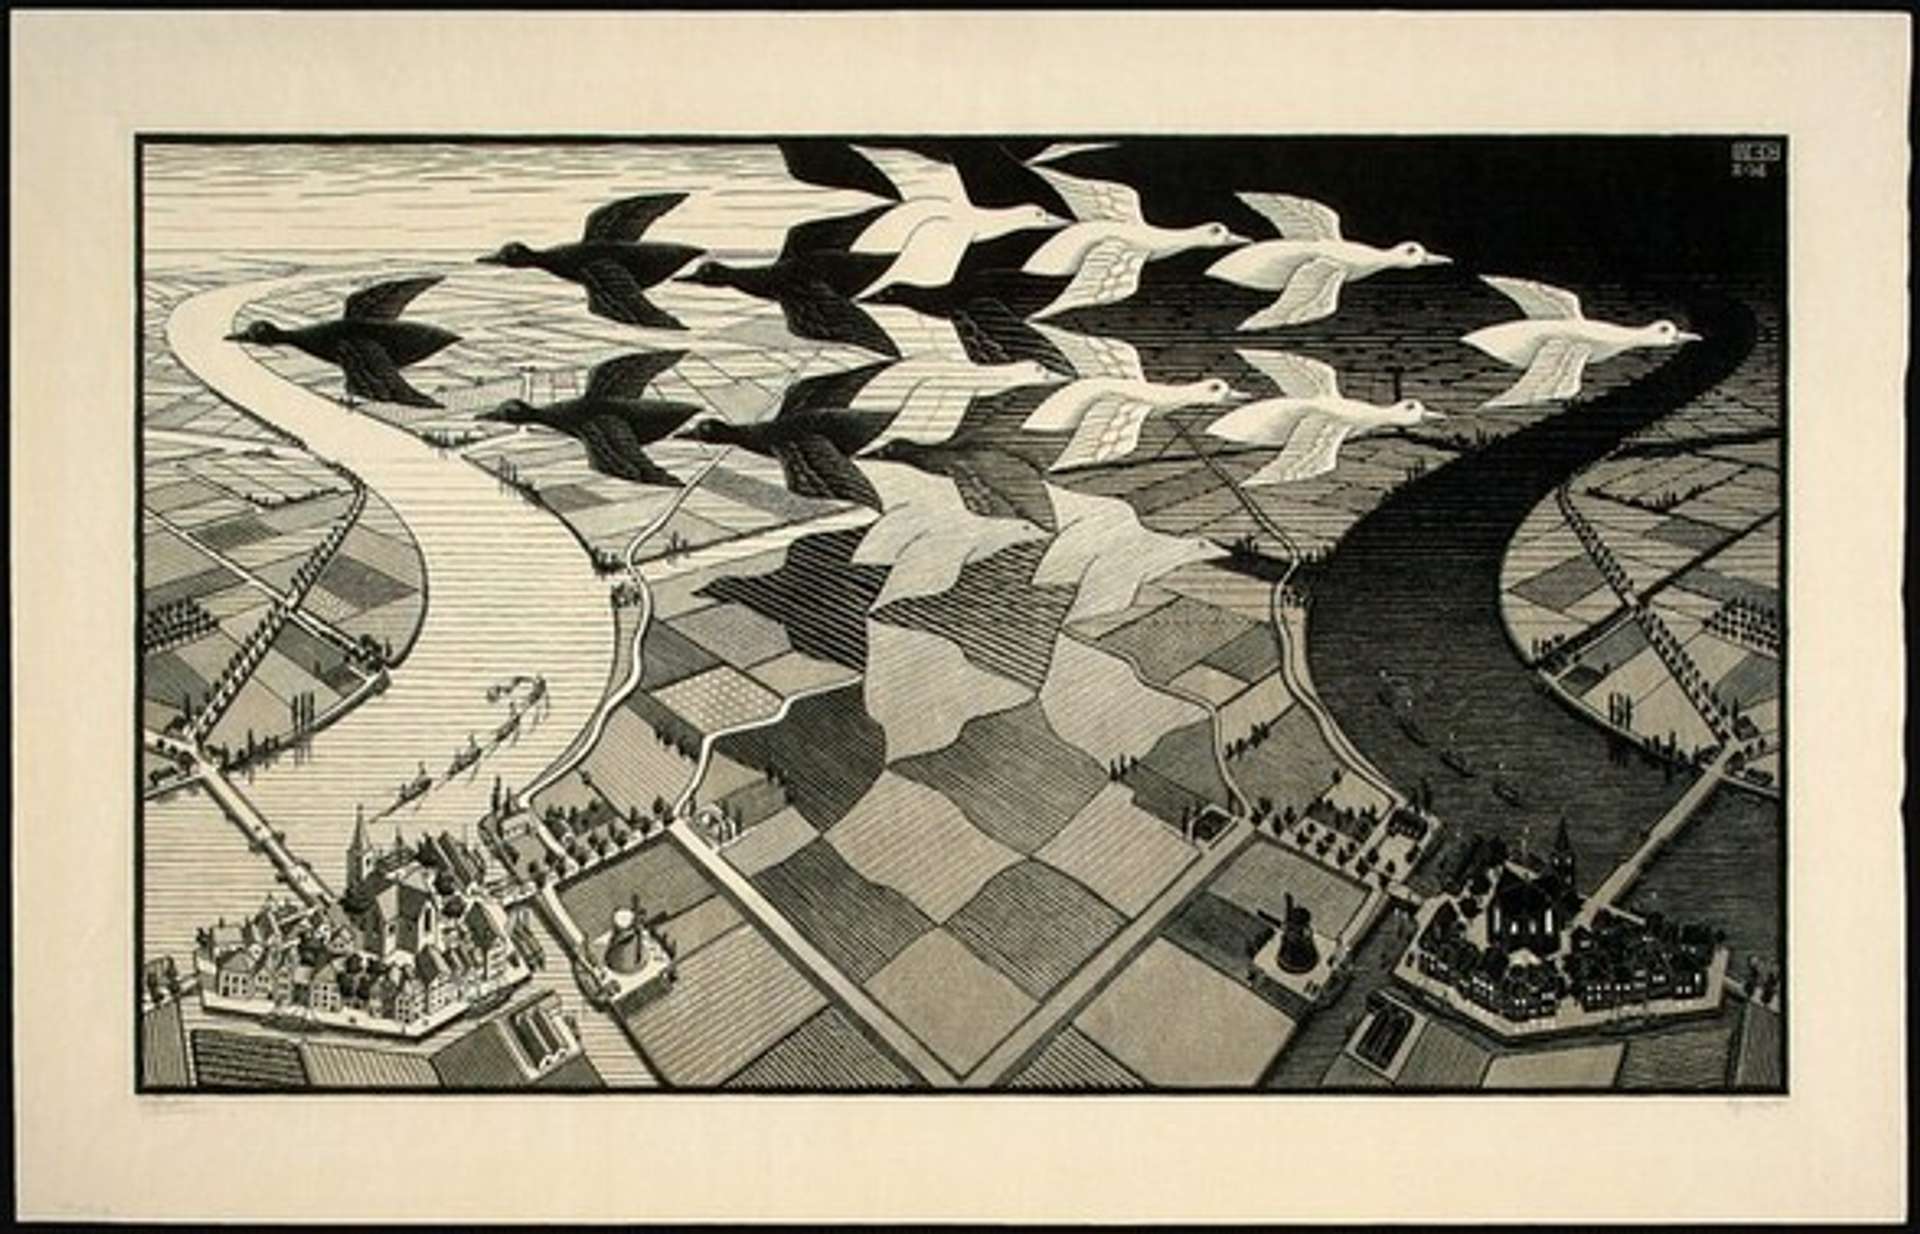 A black and white woodcut print titled "Day and Night" by M.C. Escher, featuring two landscapes in contrasting scenes and a tessellated pattern of black and white birds in the foreground.